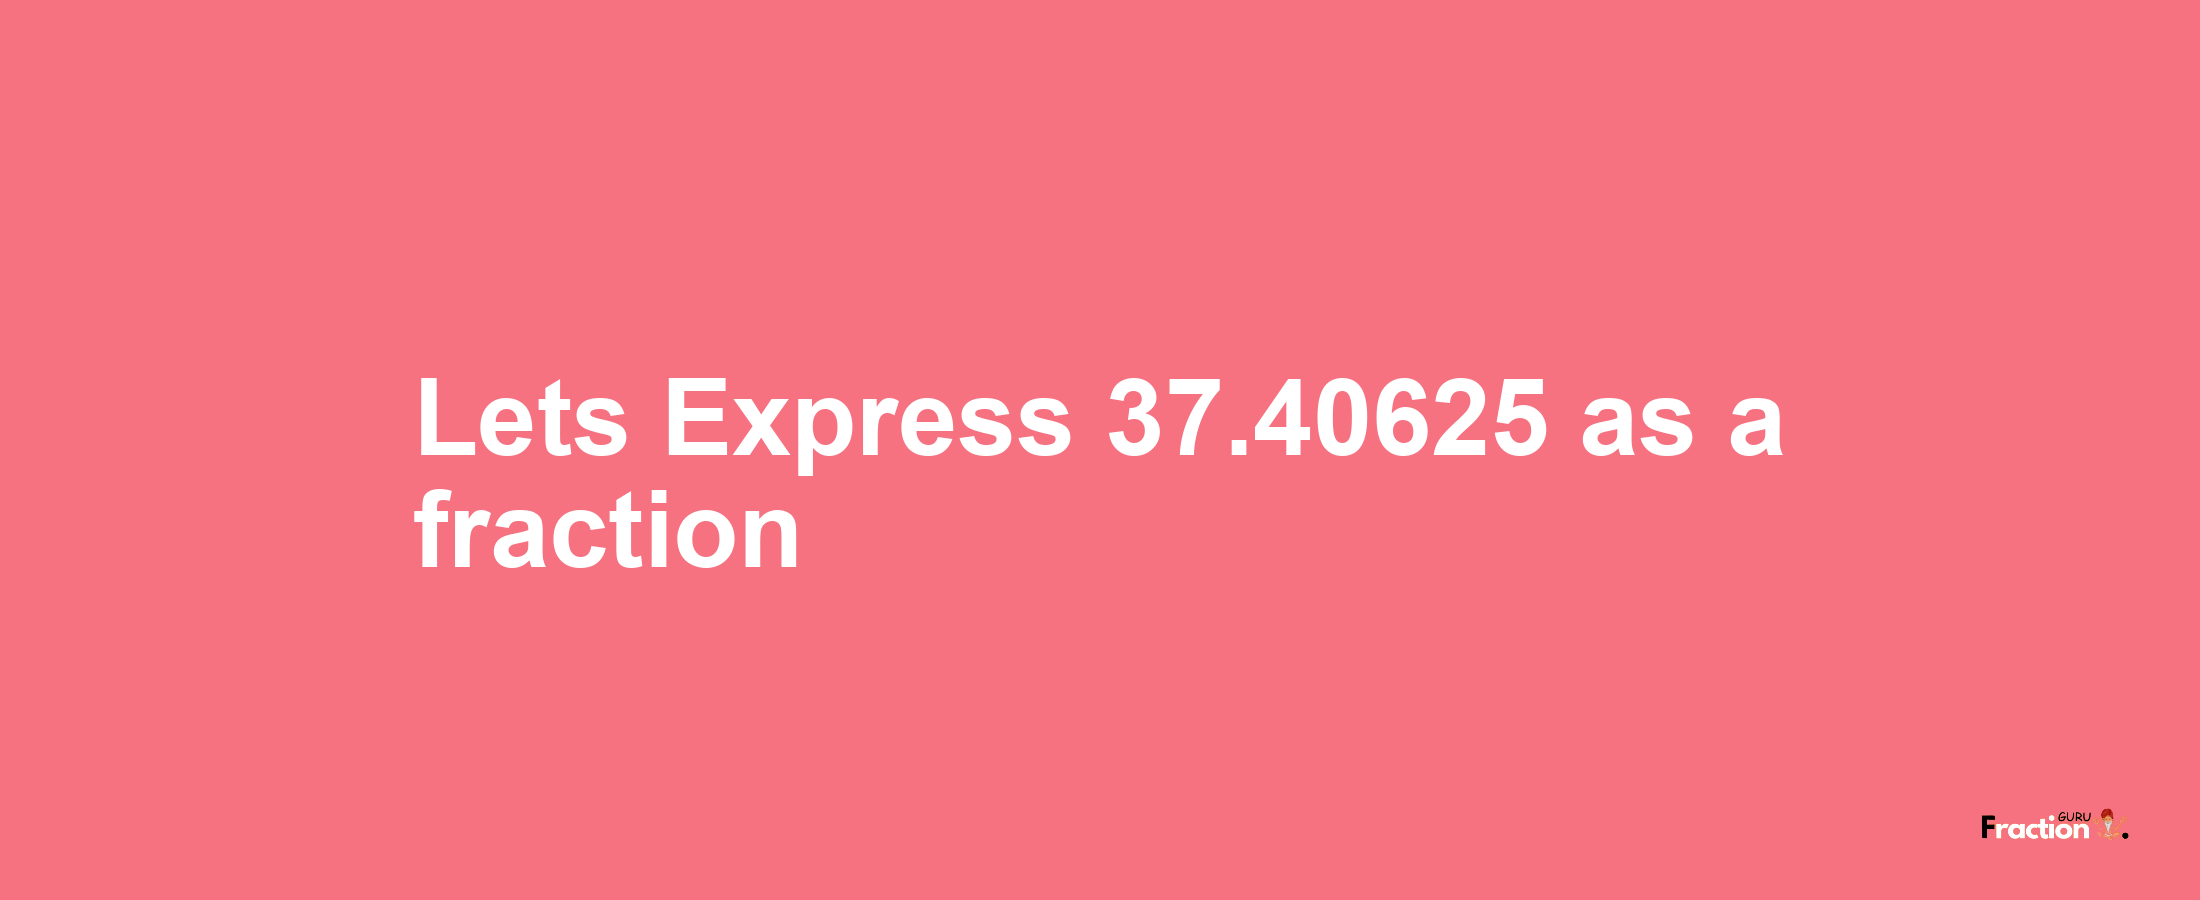 Lets Express 37.40625 as afraction